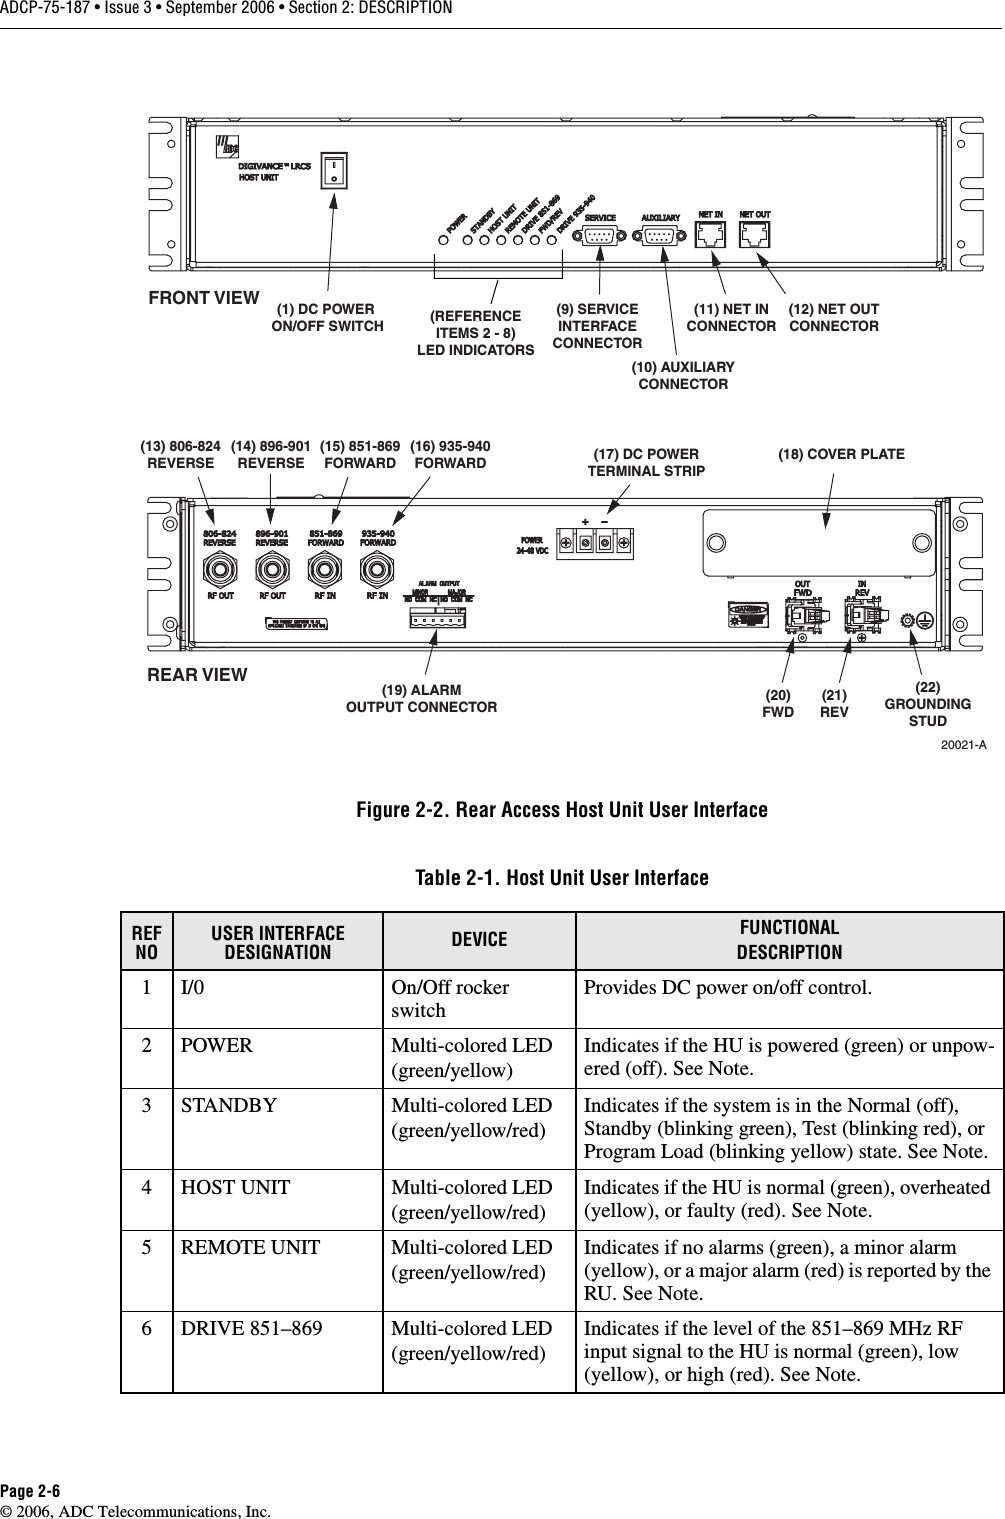 ADCP-75-187 • Issue 3 • September 2006 • Section 2: DESCRIPTIONPage 2-6© 2006, ADC Telecommunications, Inc.Figure 2-2. Rear Access Host Unit User InterfaceTable 2-1. Host Unit User InterfaceREF NOUSER INTERFACE DESIGNATION DEVICE FUNCTIONALDESCRIPTION1 I/0 On/Off rocker switchProvides DC power on/off control. 2 POWER Multi-colored LED(green/yellow)Indicates if the HU is powered (green) or unpow-ered (off). See Note.3 STANDBY Multi-colored LED(green/yellow/red)Indicates if the system is in the Normal (off), Standby (blinking green), Test (blinking red), or Program Load (blinking yellow) state. See Note. 4 HOST UNIT Multi-colored LED(green/yellow/red)Indicates if the HU is normal (green), overheated (yellow), or faulty (red). See Note. 5 REMOTE UNIT Multi-colored LED(green/yellow/red)Indicates if no alarms (green), a minor alarm (yellow), or a major alarm (red) is reported by the RU. See Note.6 DRIVE 851–869 Multi-colored LED(green/yellow/red)Indicates if the level of the 851–869 MHz RF input signal to the HU is normal (green), low (yellow), or high (red). See Note. (1) DC POWER ON/OFF SWITCH(21)REV(20)FWD(REFERENCEITEMS 2 - 8)LED INDICATORS(9) SERVICEINTERFACECONNECTOR(11) NET INCONNECTOR(10) AUXILIARYCONNECTOR(12) NET OUTCONNECTOR(19) ALARMOUTPUT CONNECTOR(13) 806-824REVERSE(15) 851-869FORWARD(16) 935-940FORWARD(14) 896-901REVERSE20021-A(17) DC POWERTERMINAL STRIPREAR VIEWFRONT VIEW(18) COVER PLATE(22)GROUNDINGSTUD